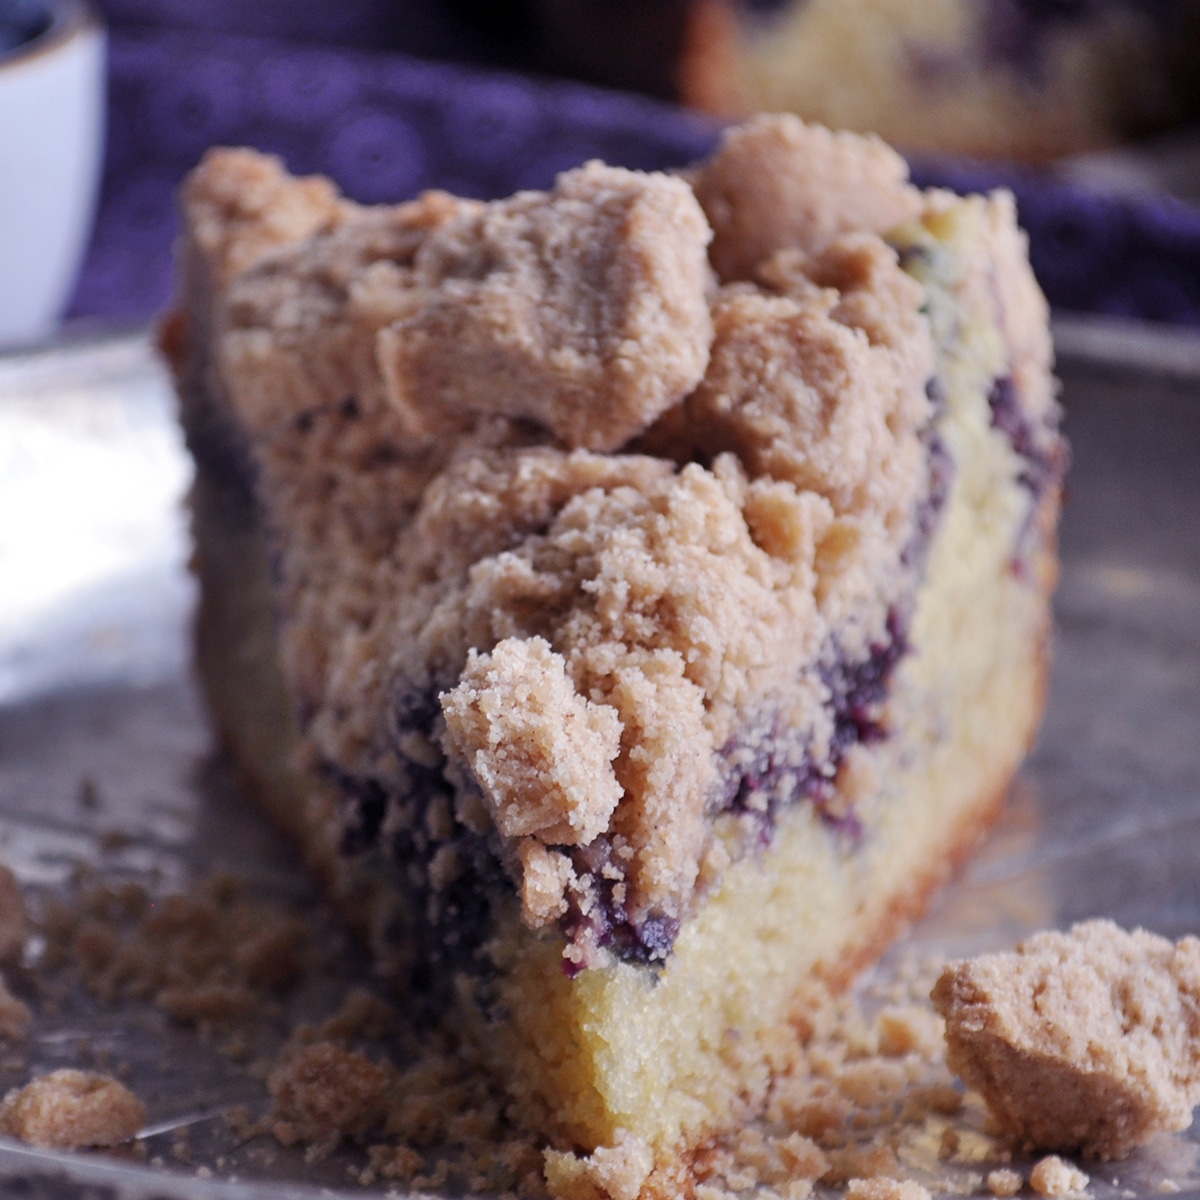 A slice of blueberry crumb cake on a tin plate.